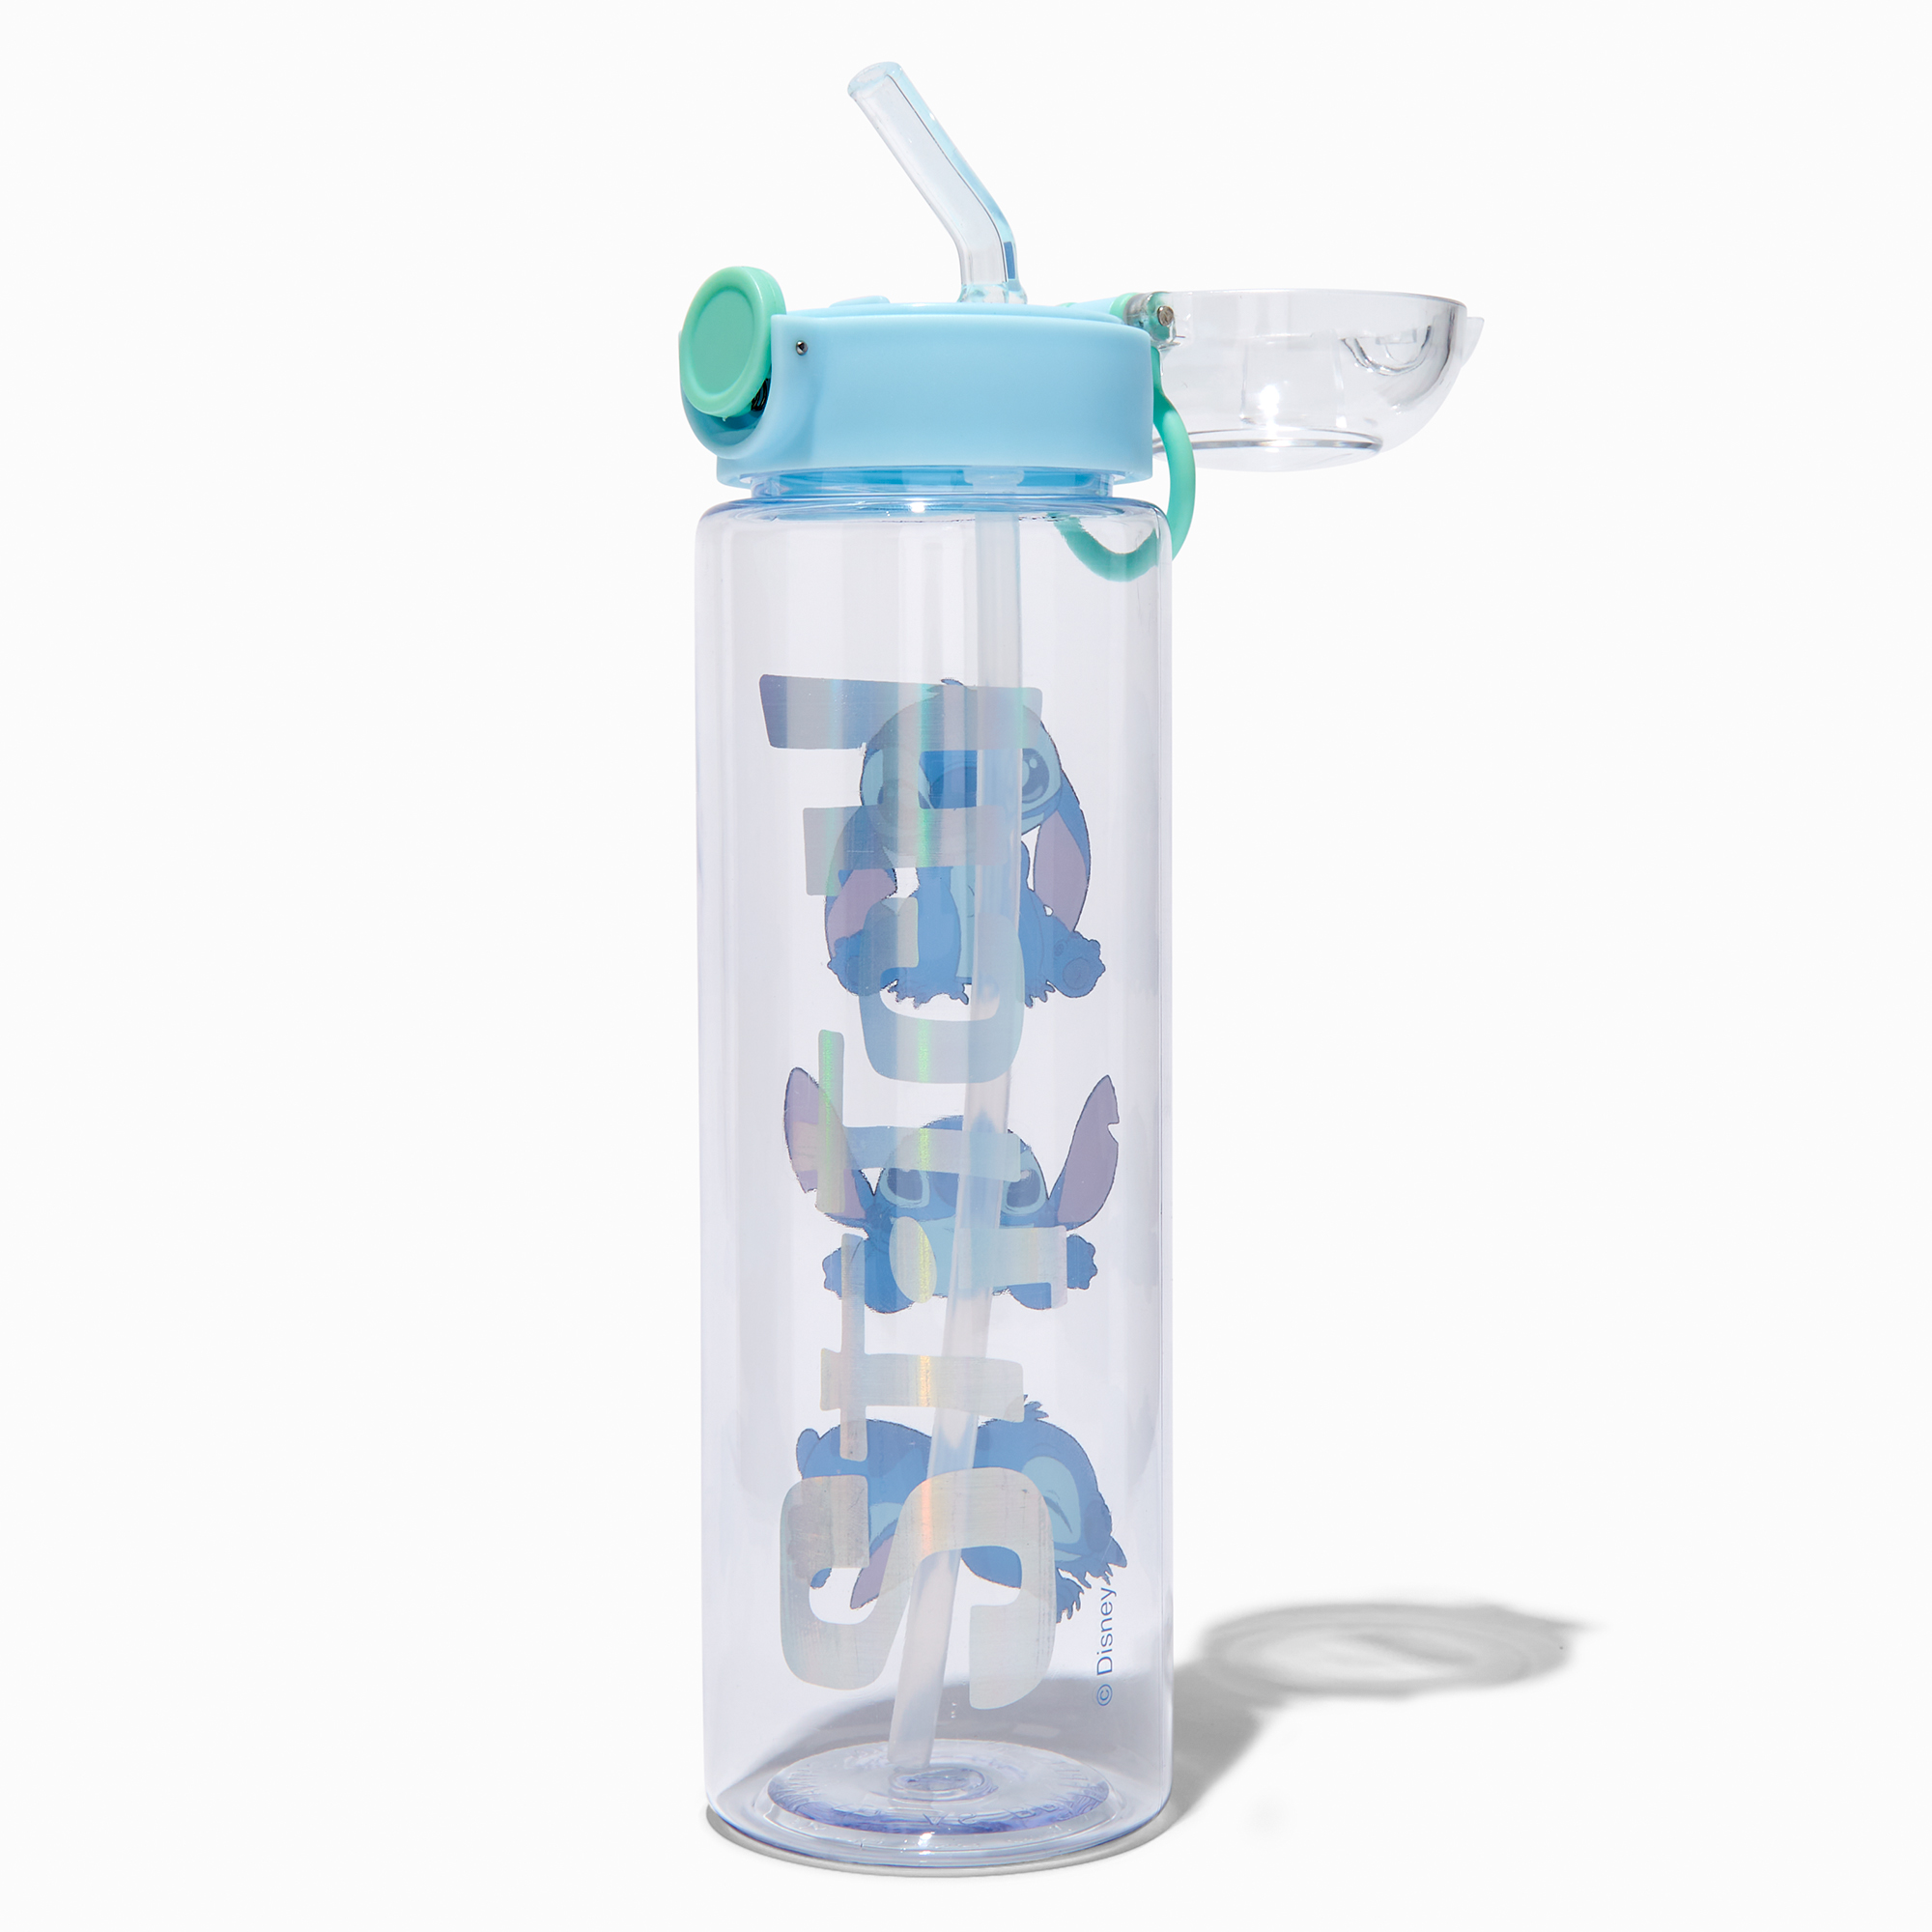 Water Bottles, Travel Mugs and Tumblers for Girls